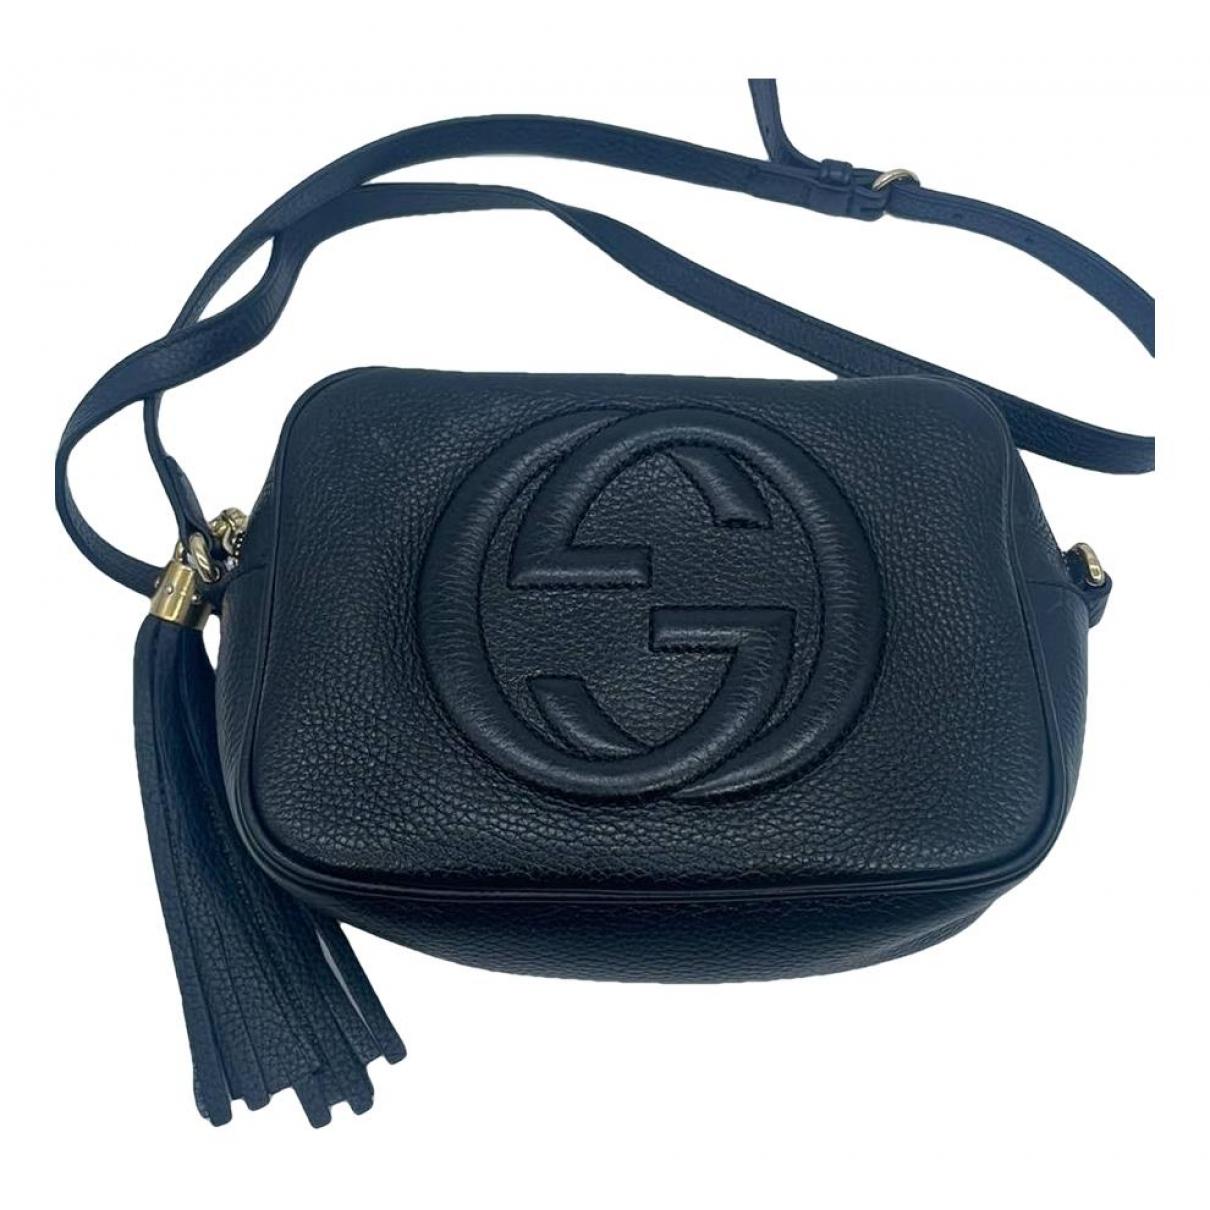 Soho long flap leather crossbody bag Gucci Black in Leather - 27460973